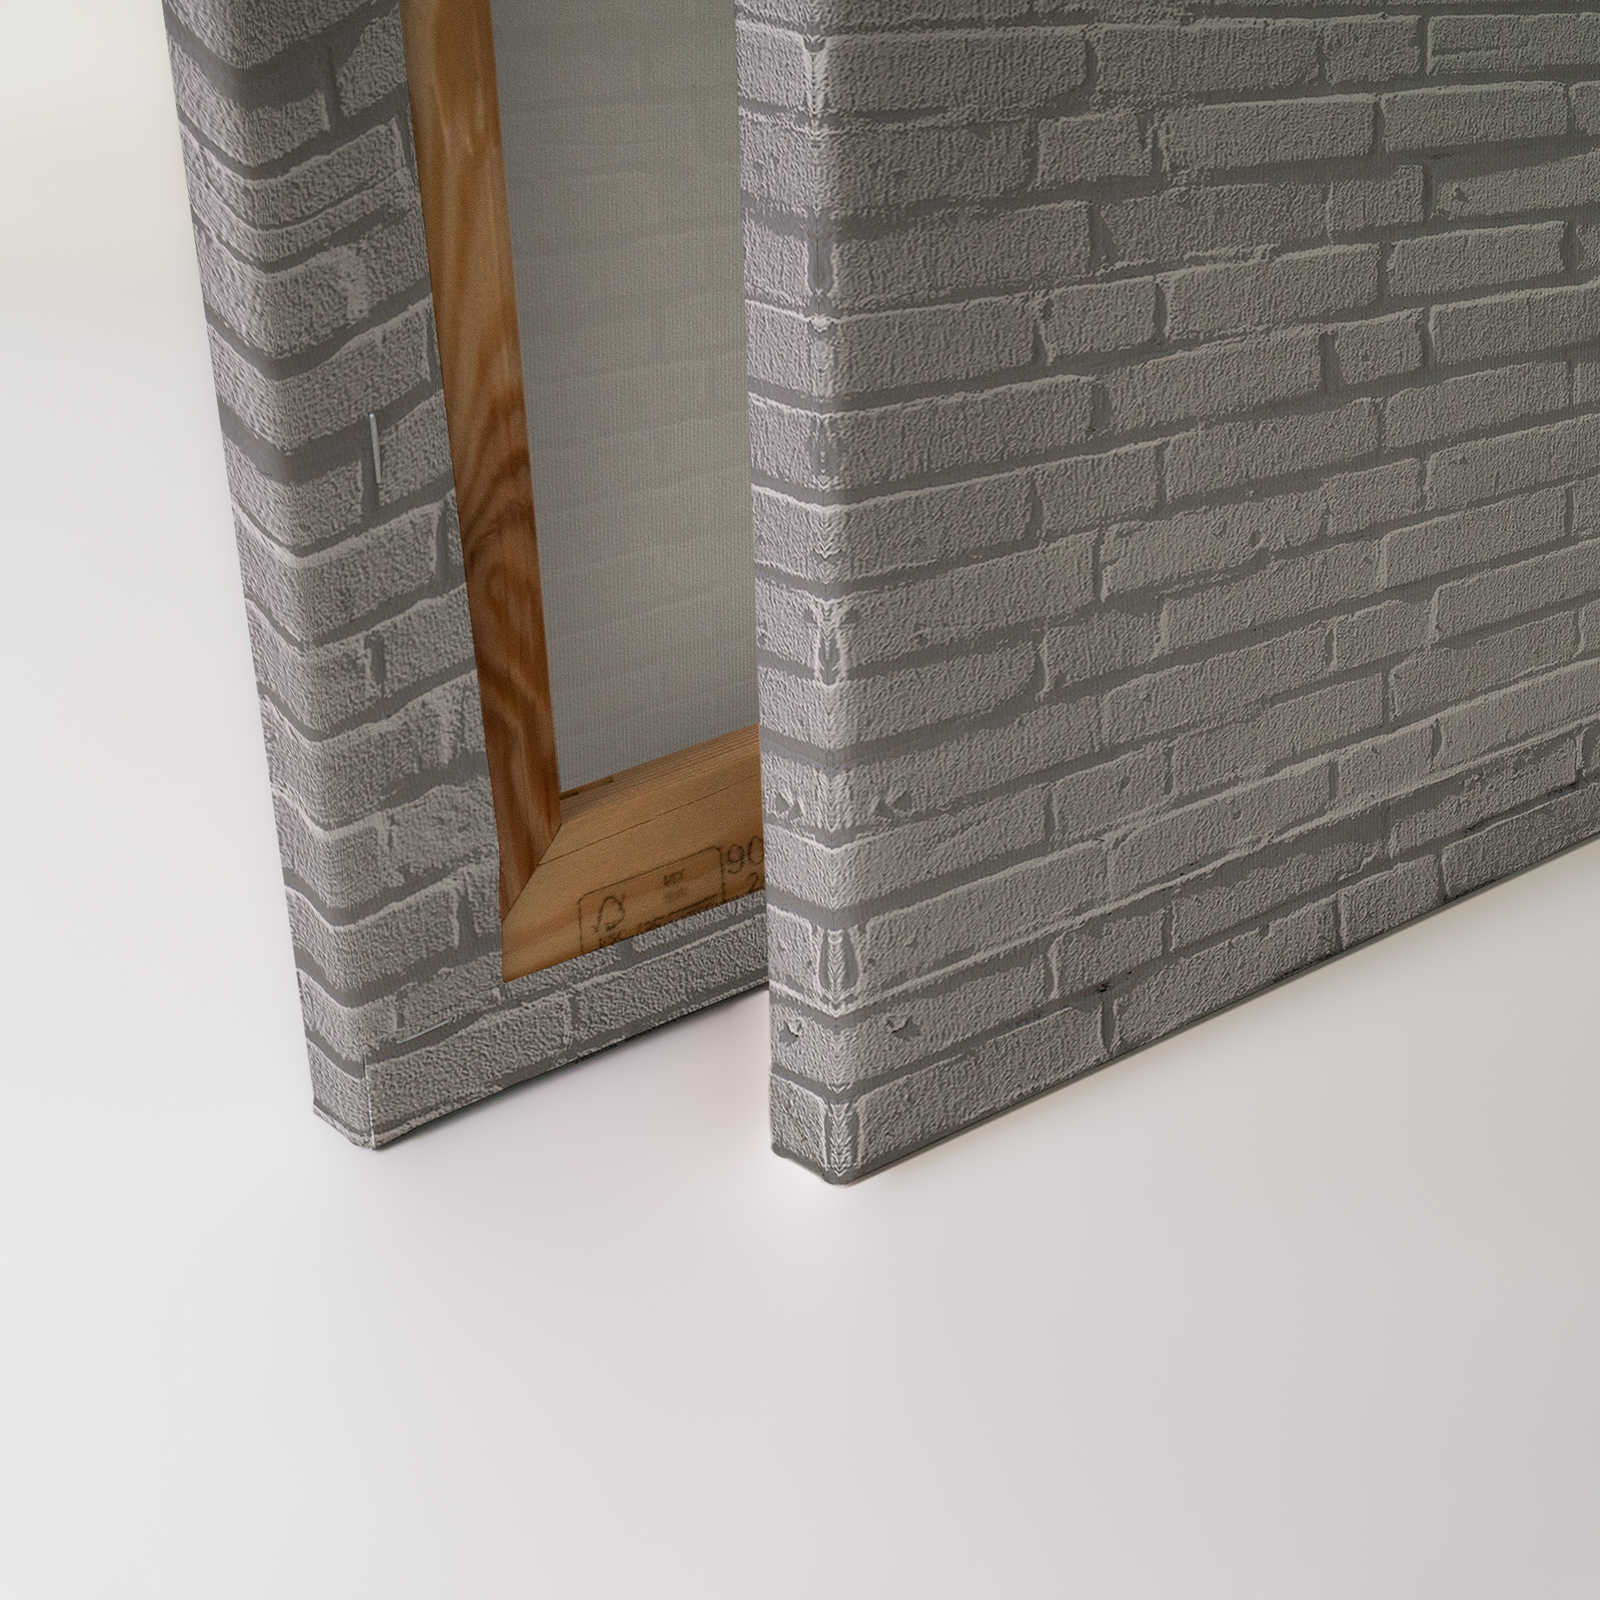             Canvas painting grey brick wall in 3D look - 1,20 m x 0,80 m
        